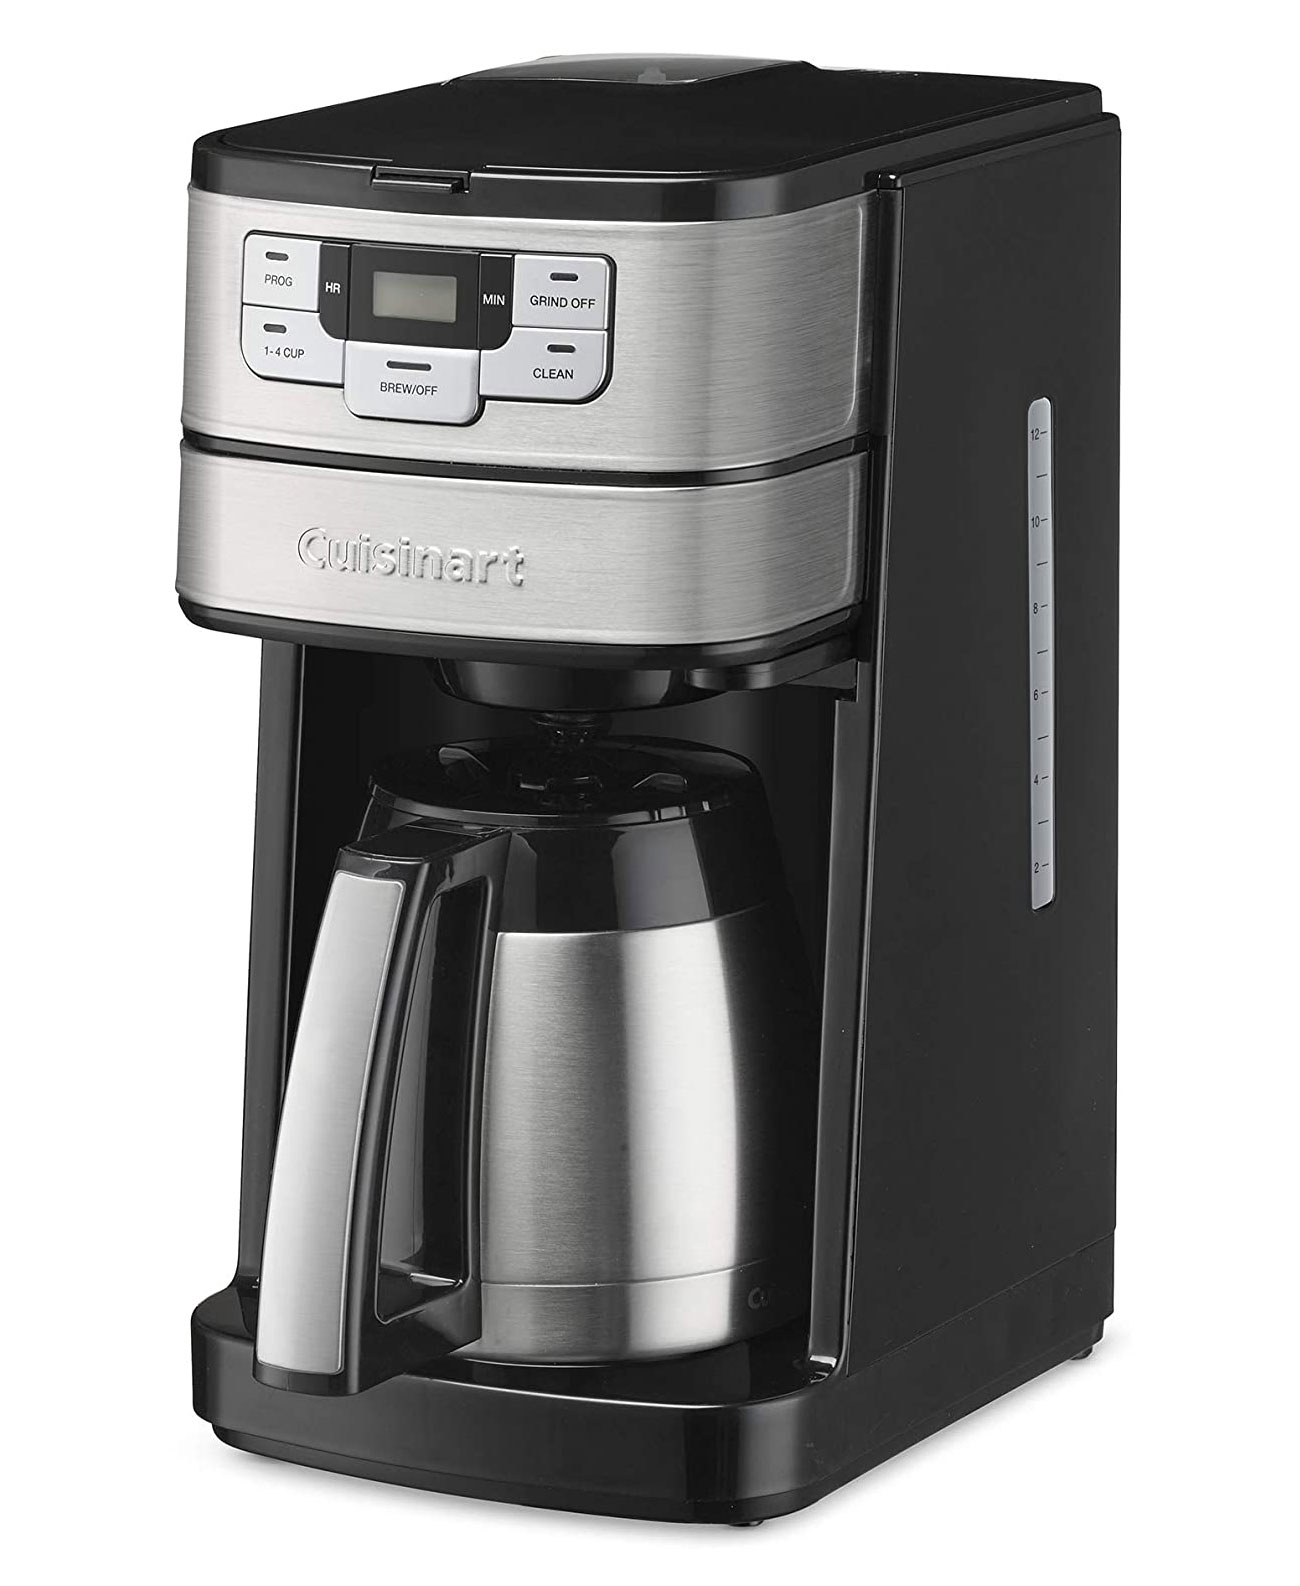 Cuisinart Auto Grind & Brew 10 Cup Coffee Maker